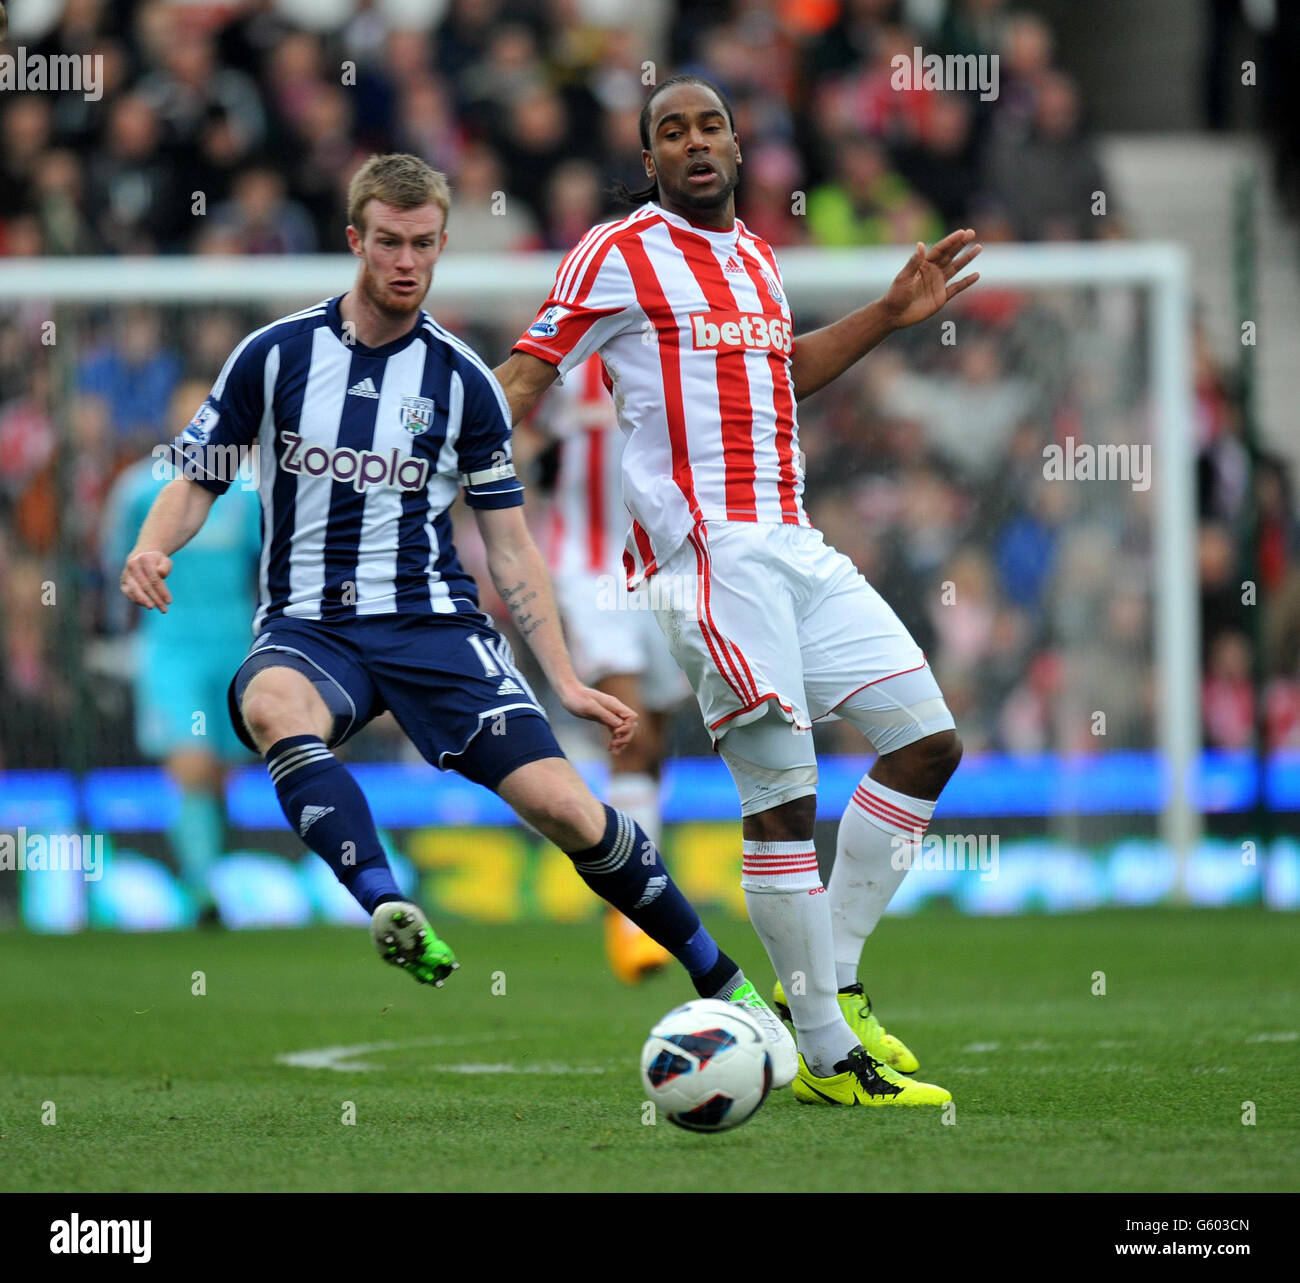 West Bromwich Albion's Chris Brunt and Stoke City's Cameron Jerome (right) during the Barclays Premier League match at the Britannia Stadium, Stoke. Stock Photo